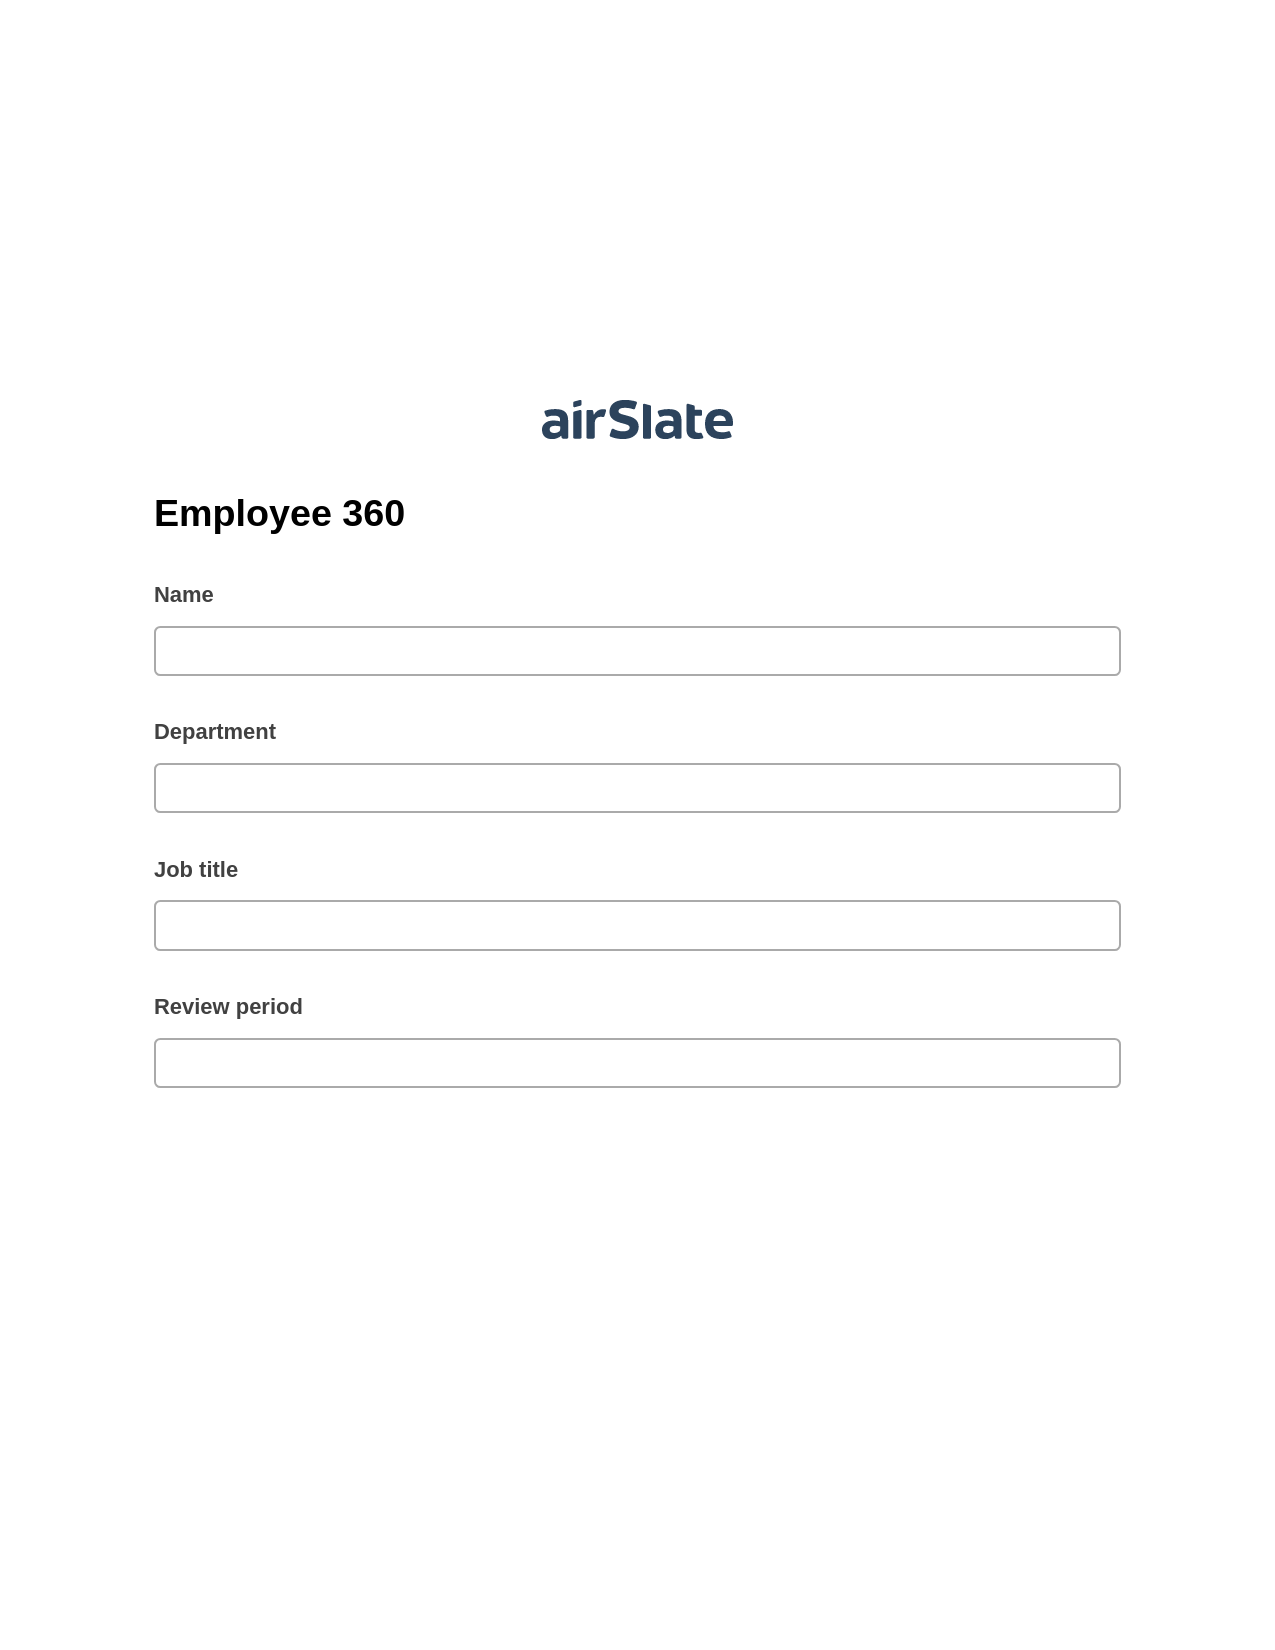 Multirole Employee 360 Pre-fill from Salesforce Records with SOQL Bot, Invoke Salesforce Process Bot, Archive to OneDrive Bot